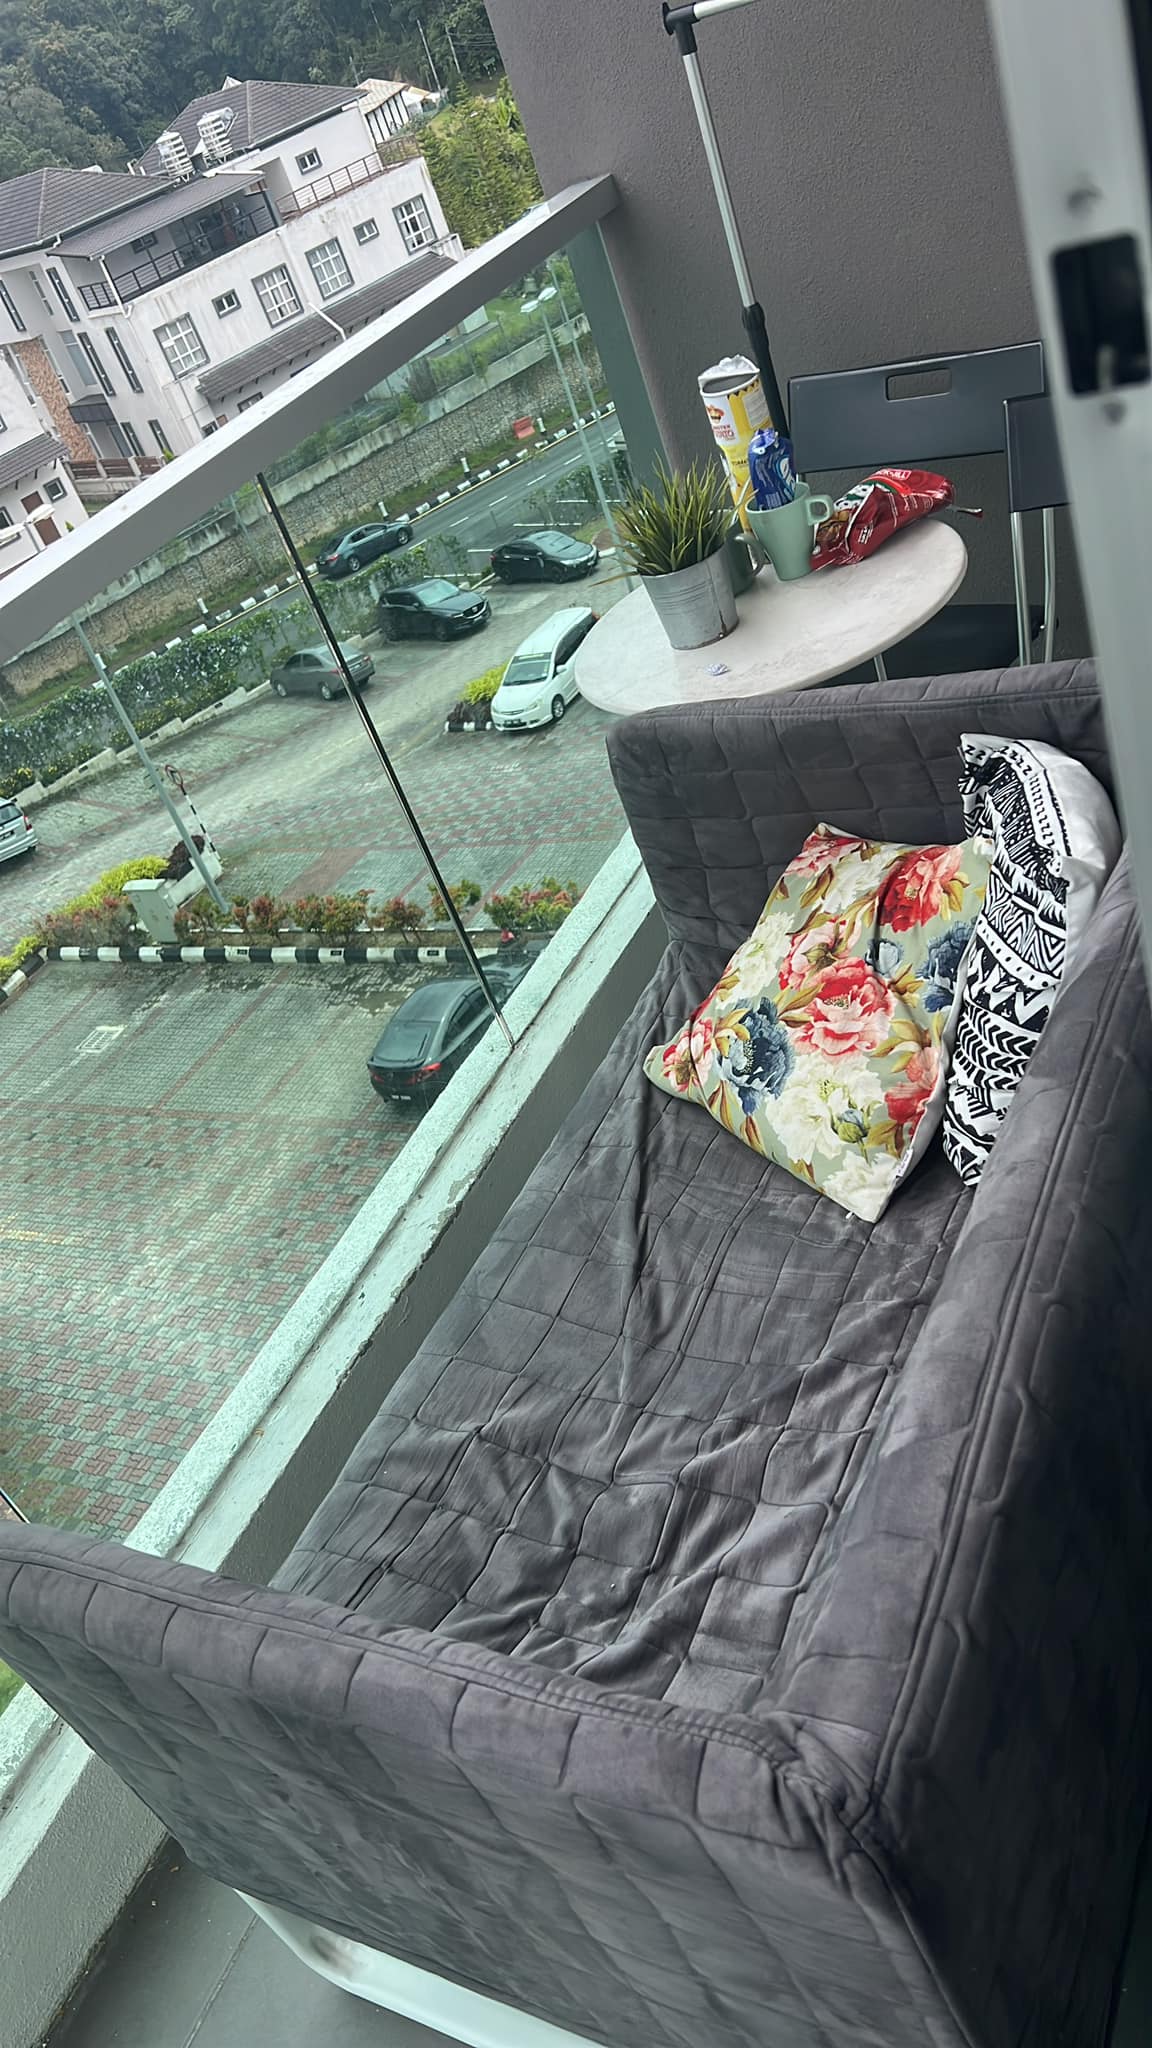 A loveseat was shifted out onto the balcony and left in place after they checked out of the homestay. Image credit: Nur Izzati Nadia